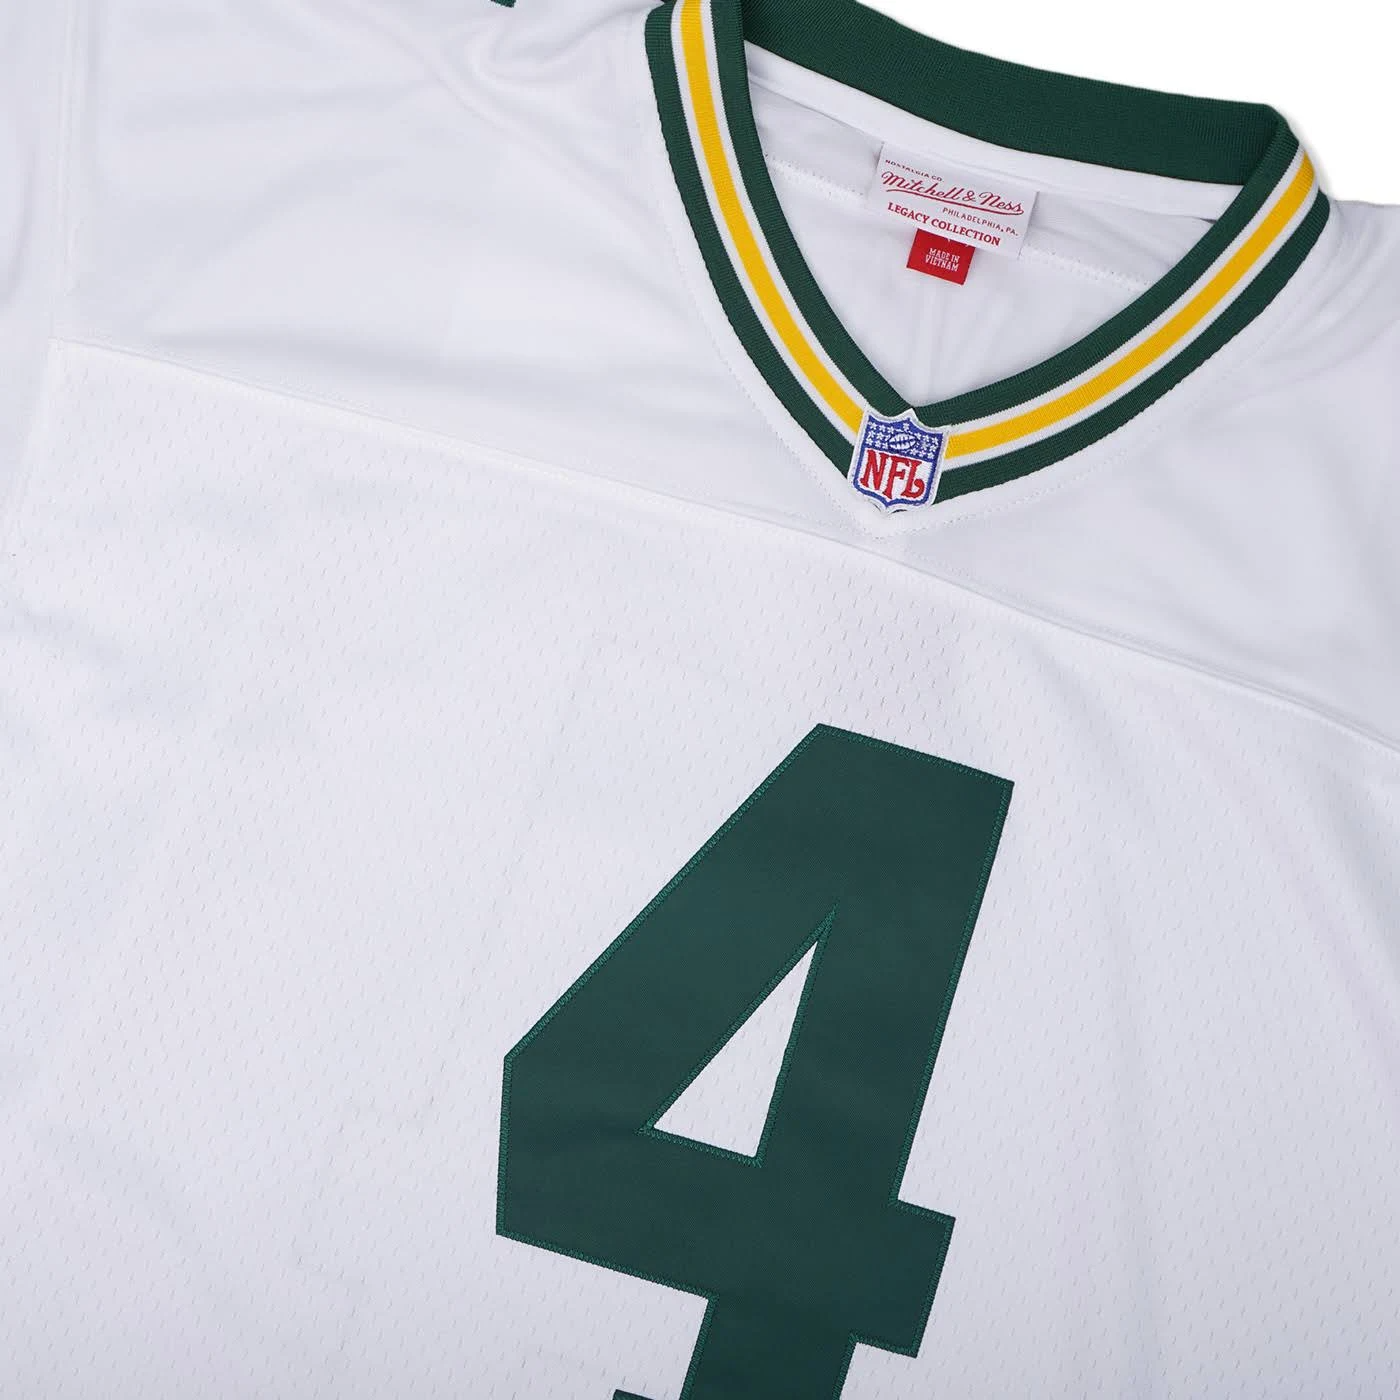 Brett Favre Green Bay Packers Mitchell & Ness Youth 1996 Retired Player  Legacy Jersey - Green